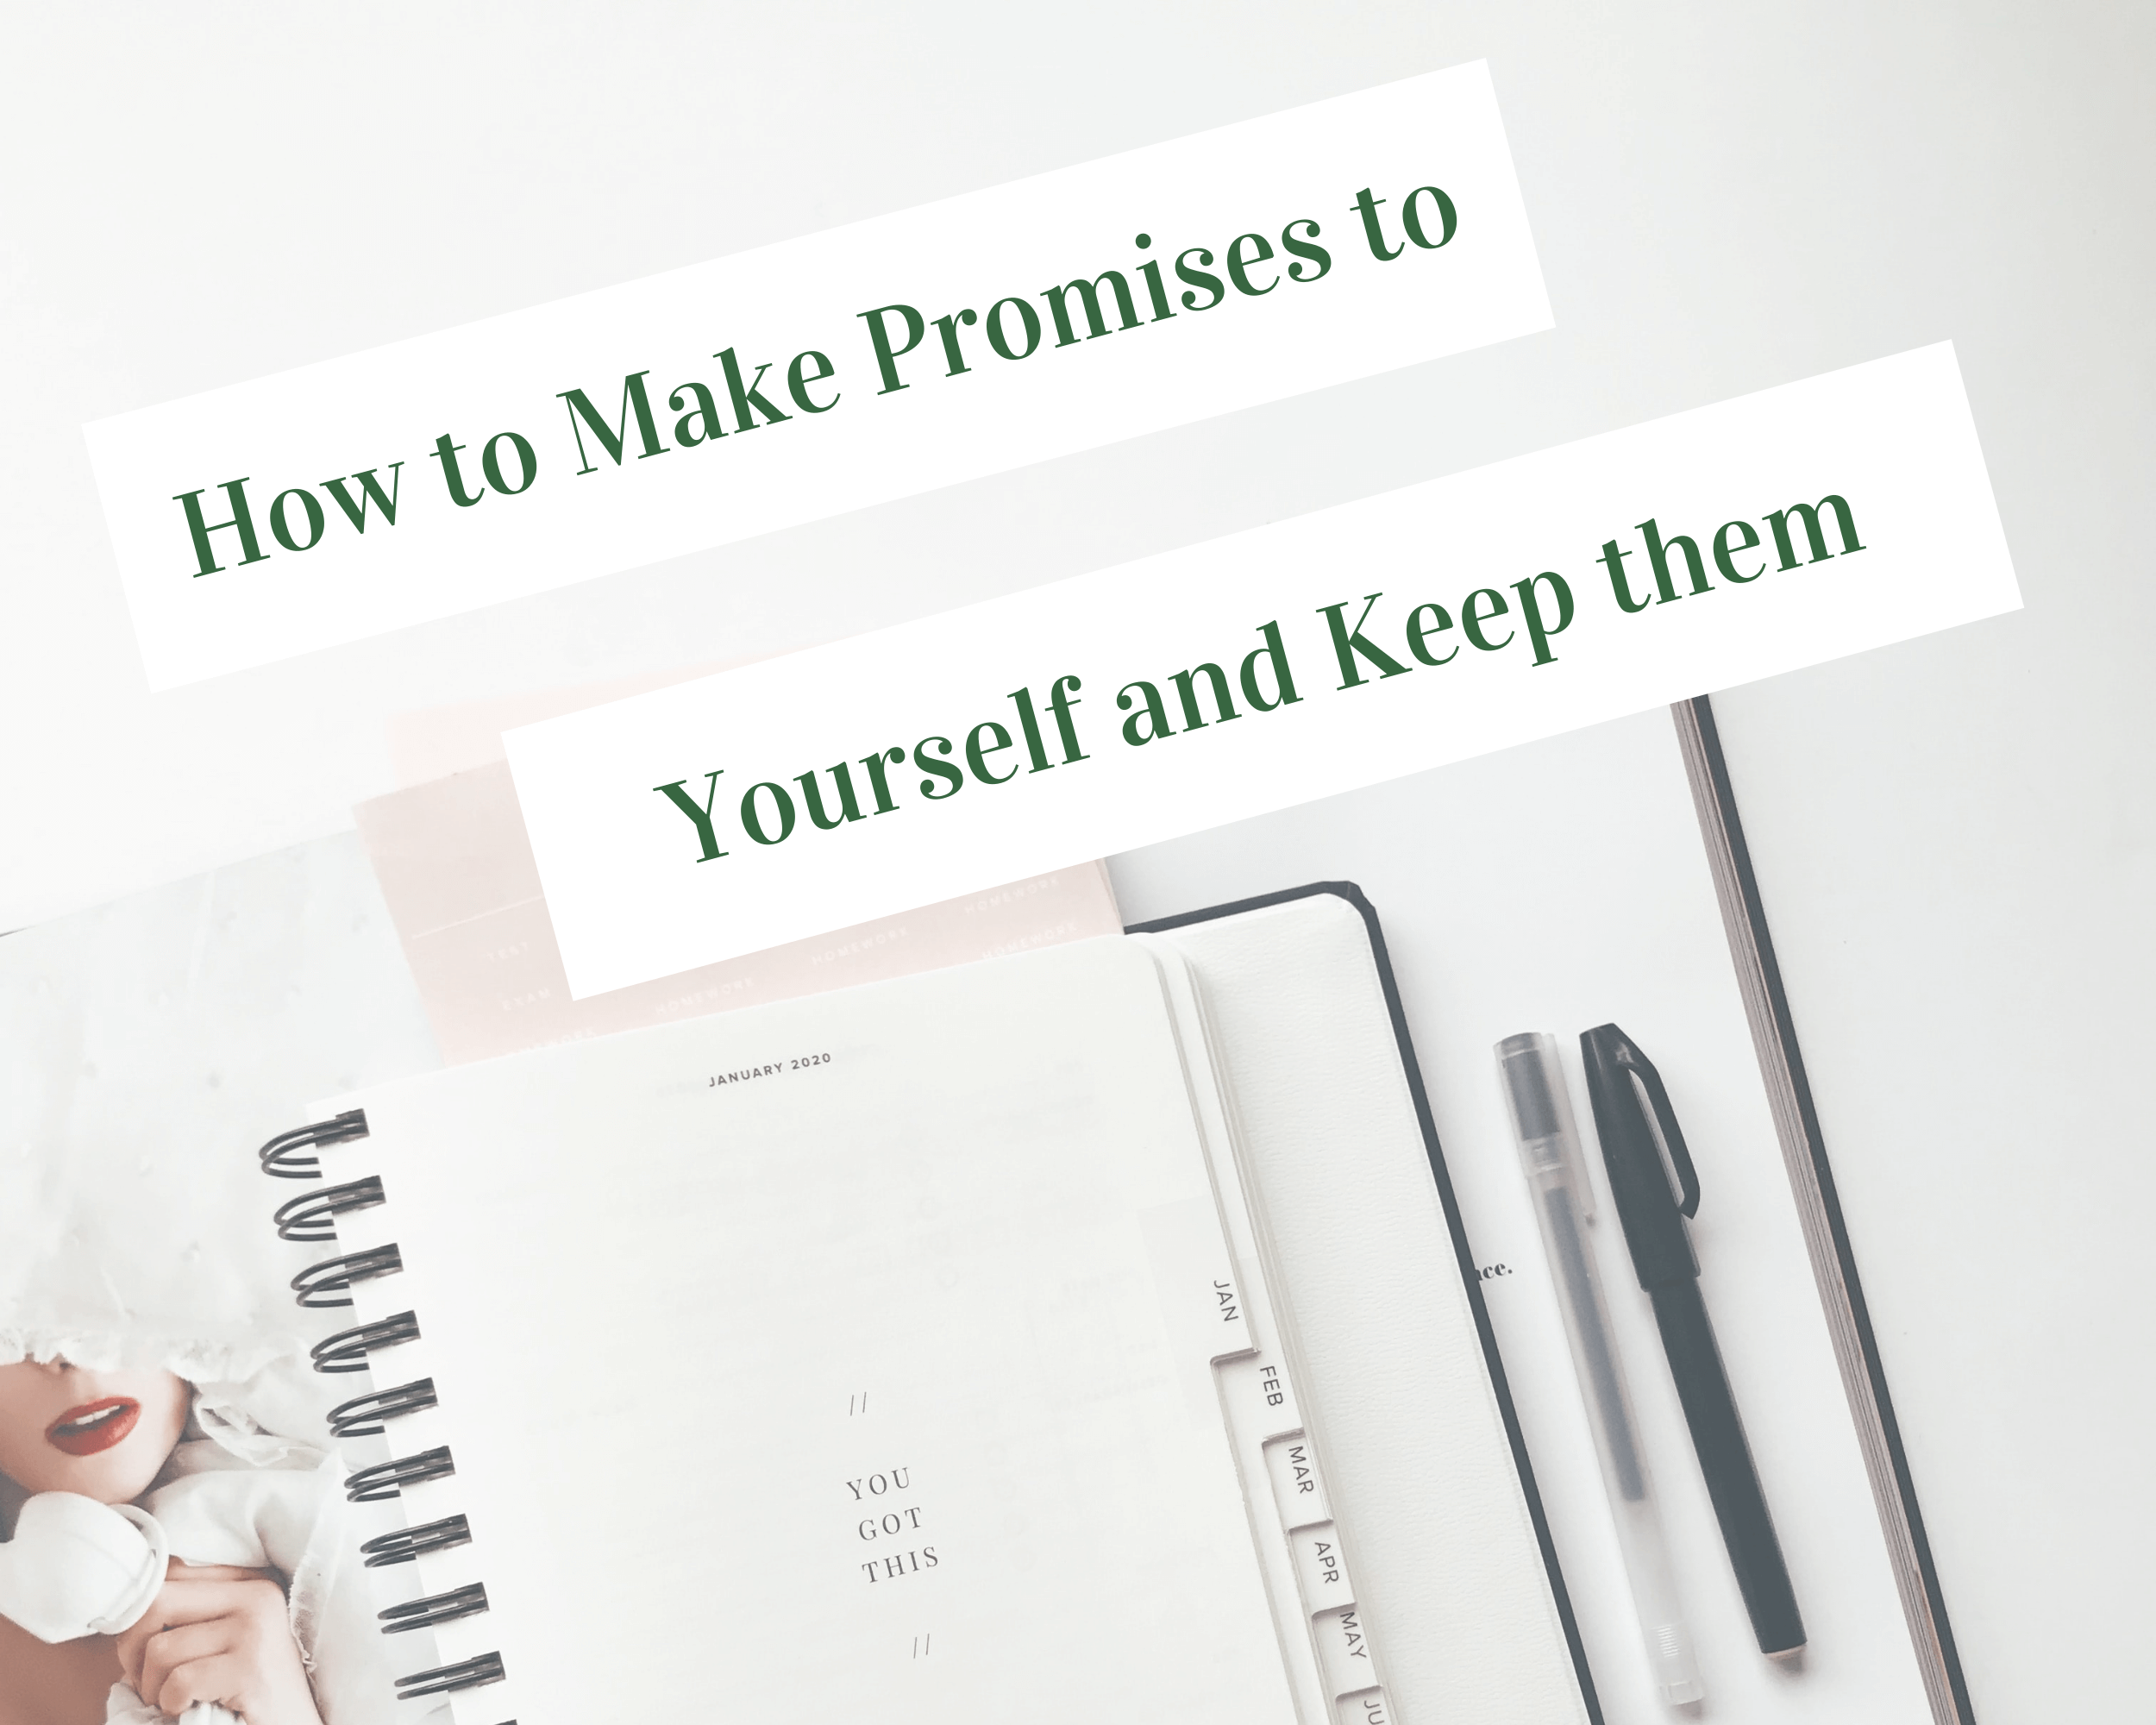 How to make promises to yourself and keep them